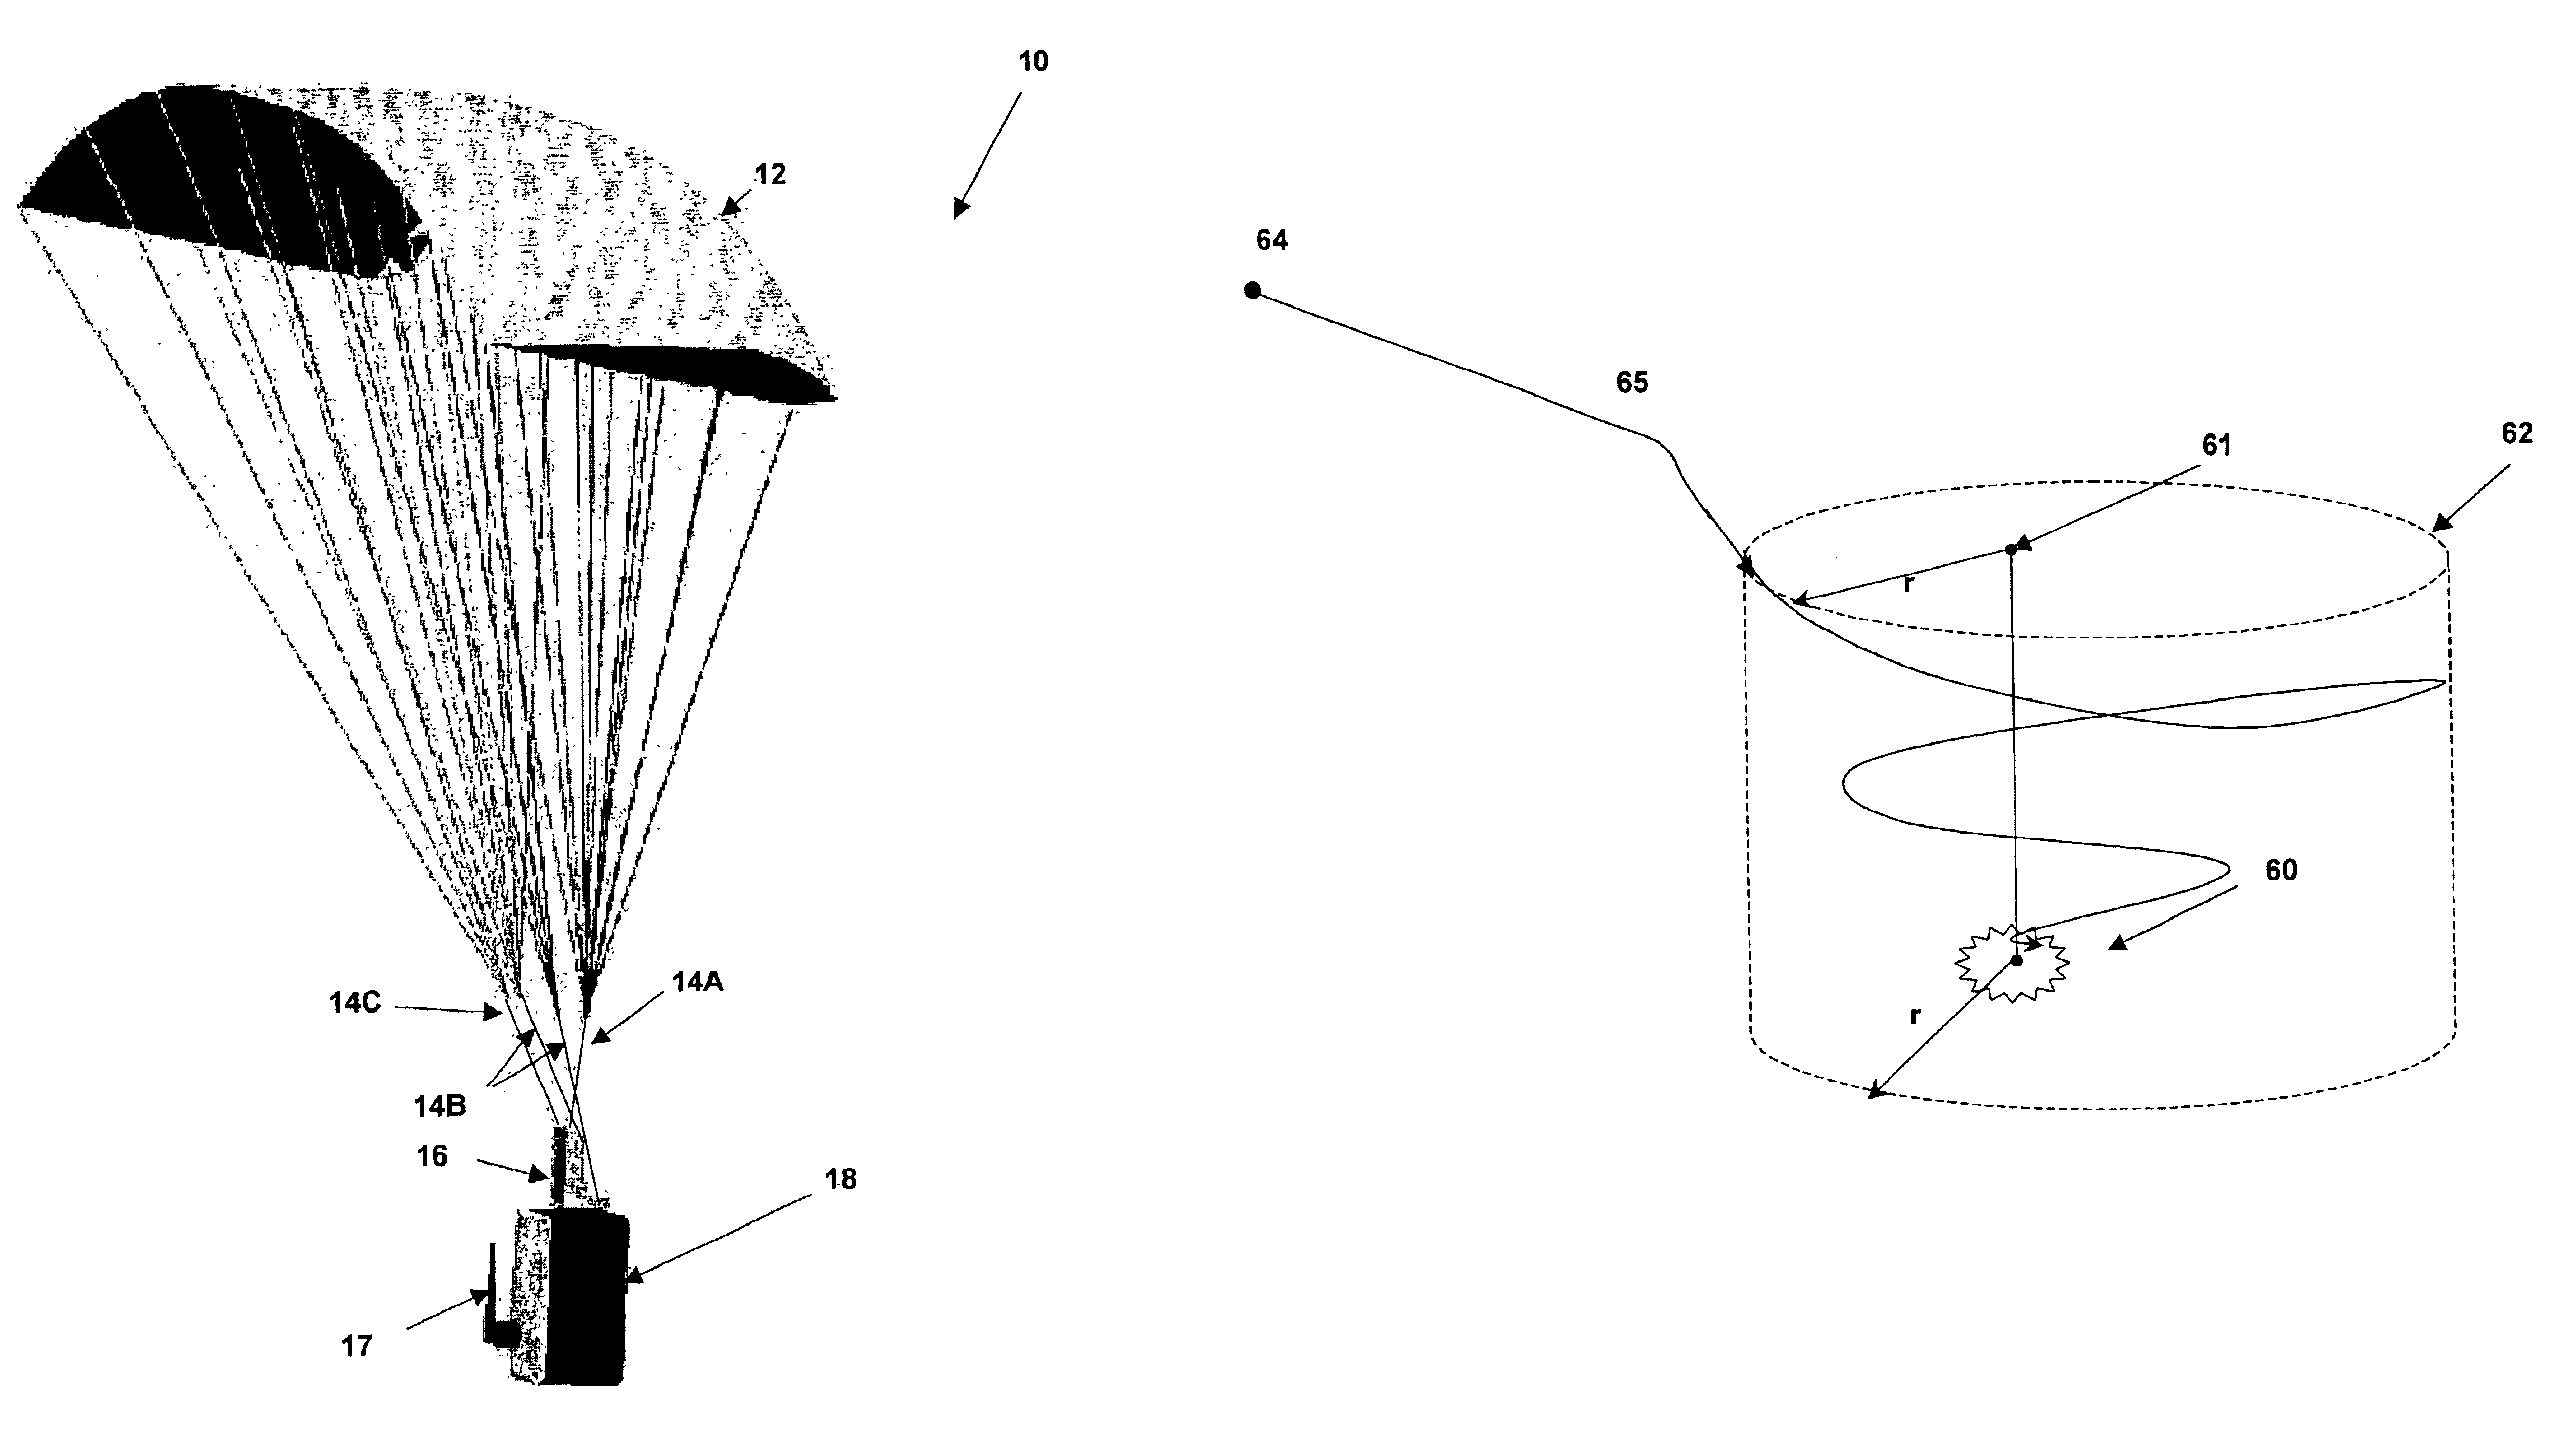 Guided parafoil system for delivering lightweight payloads